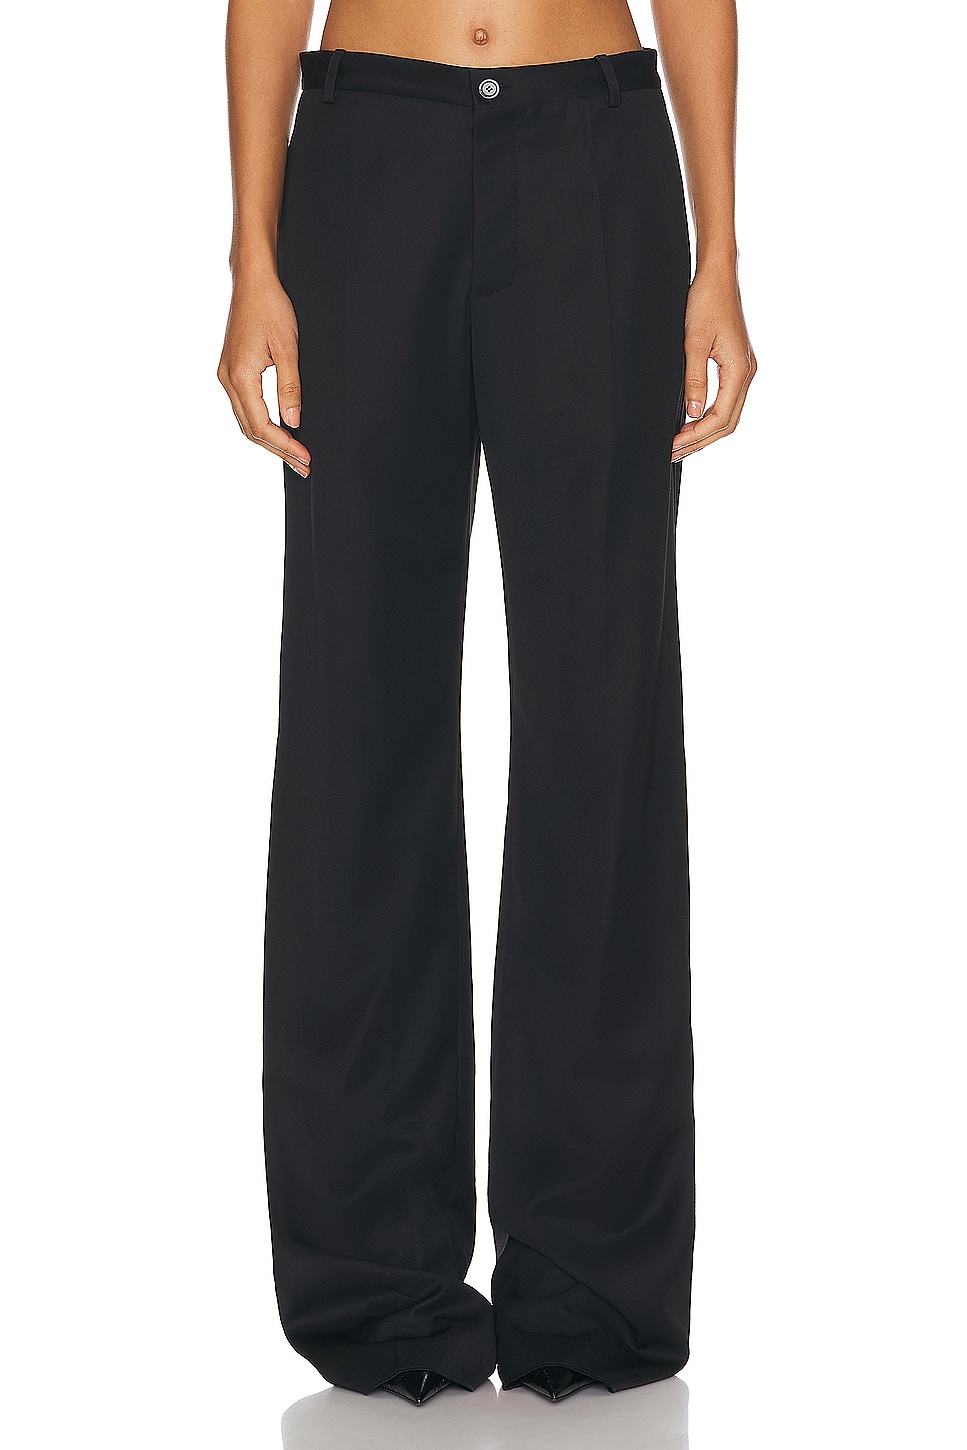 Image 1 of Balenciaga Tailored Pant in Anthracite